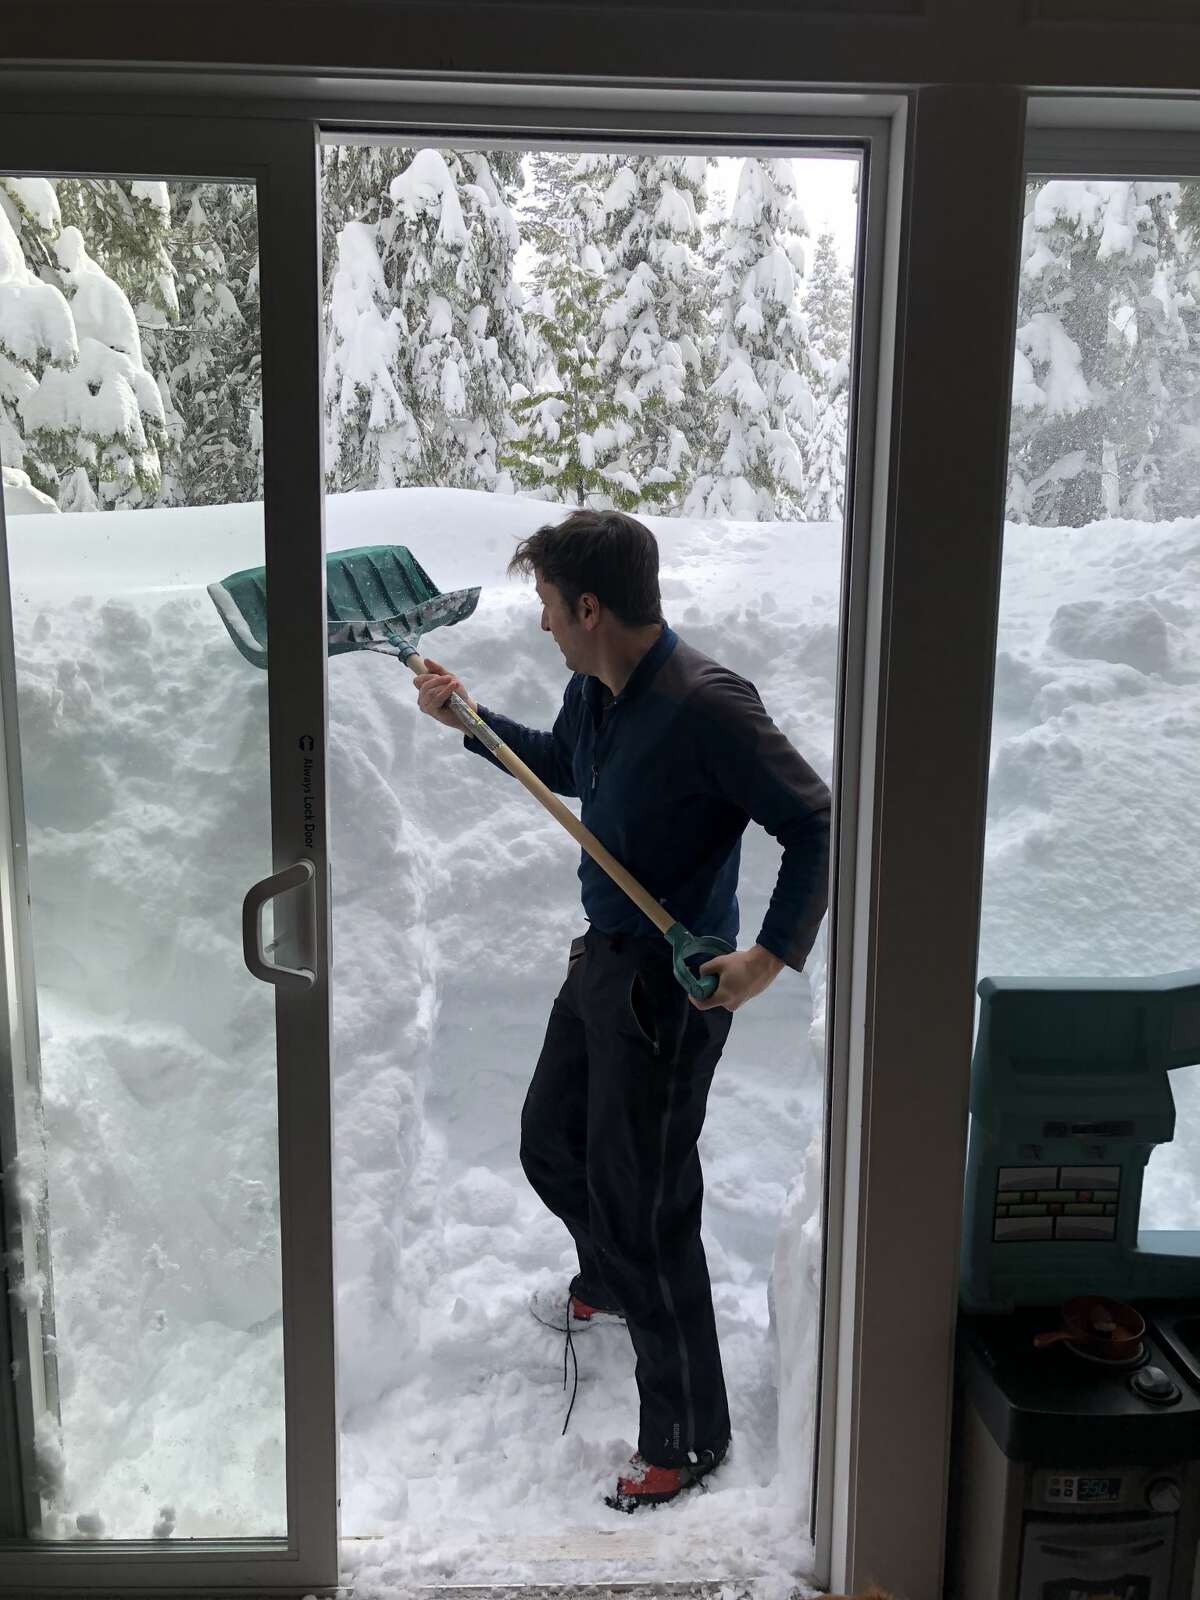 Eric Dilda and his family found themselves snowed in over the weekend.